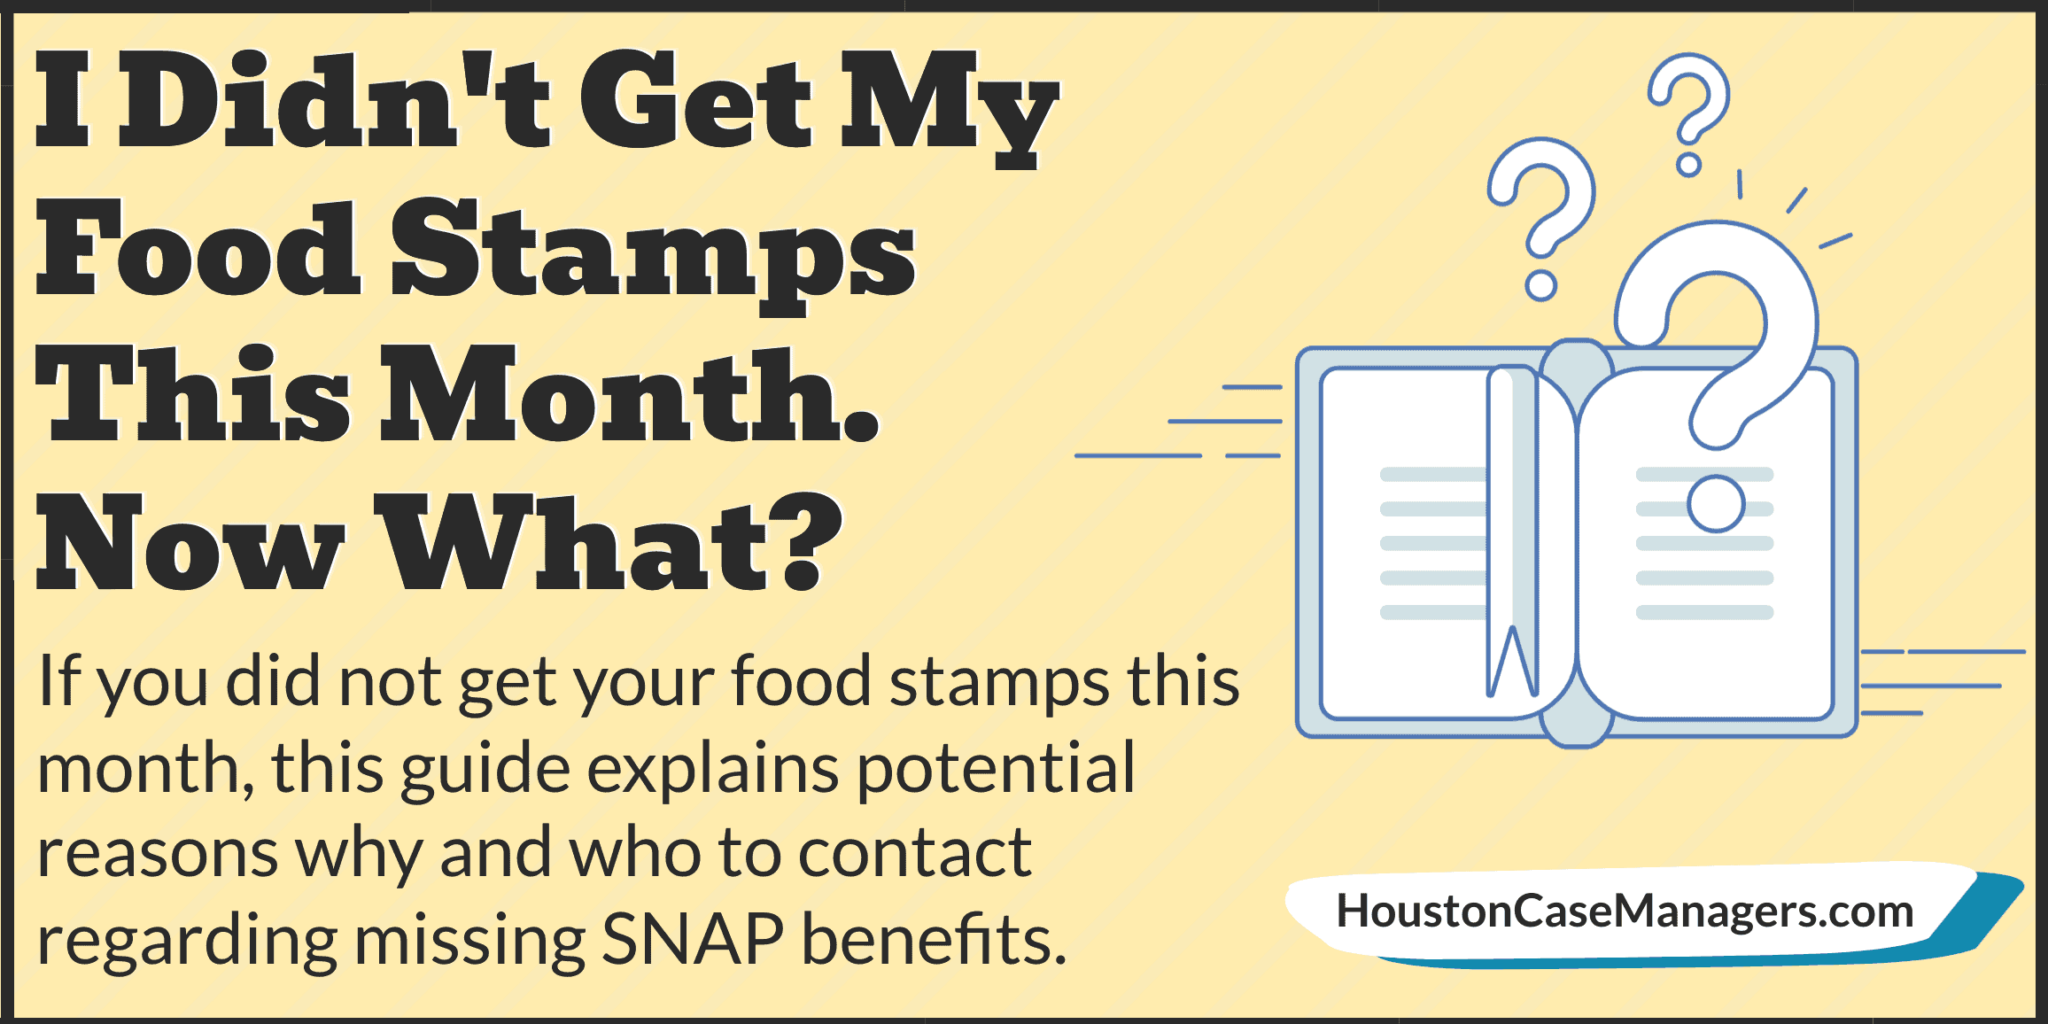 I Didn't Get My Food Stamps This Month. Now What?